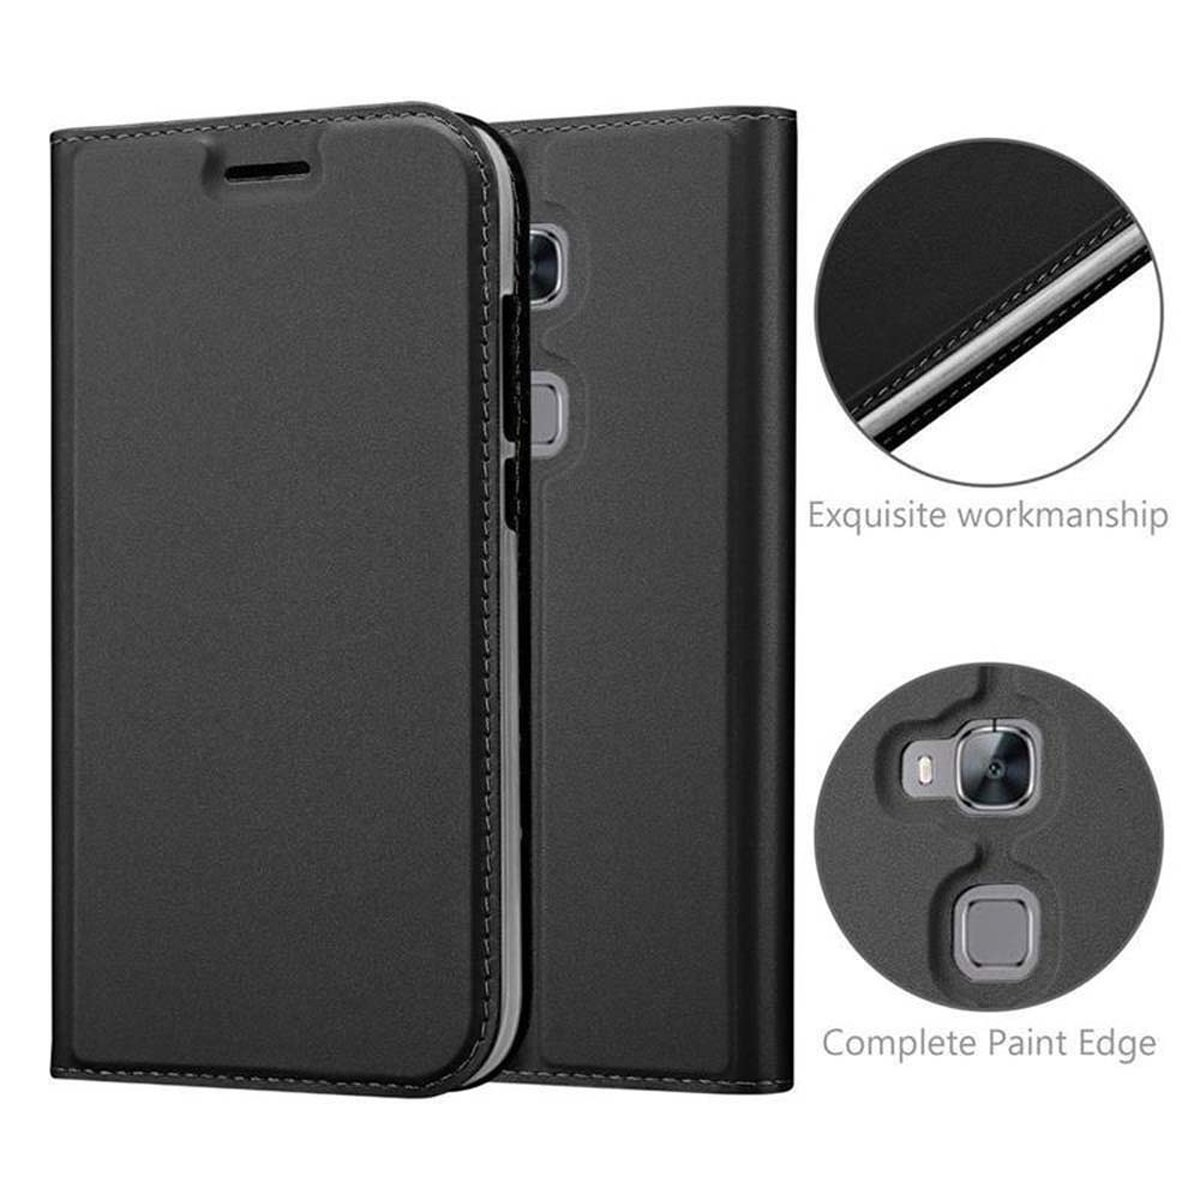 PLUS Book CLASSY SCHWARZ Huawei, / CADORABO G7 Handyhülle Bookcover, Style, Classy GX8, G8 / ASCEND